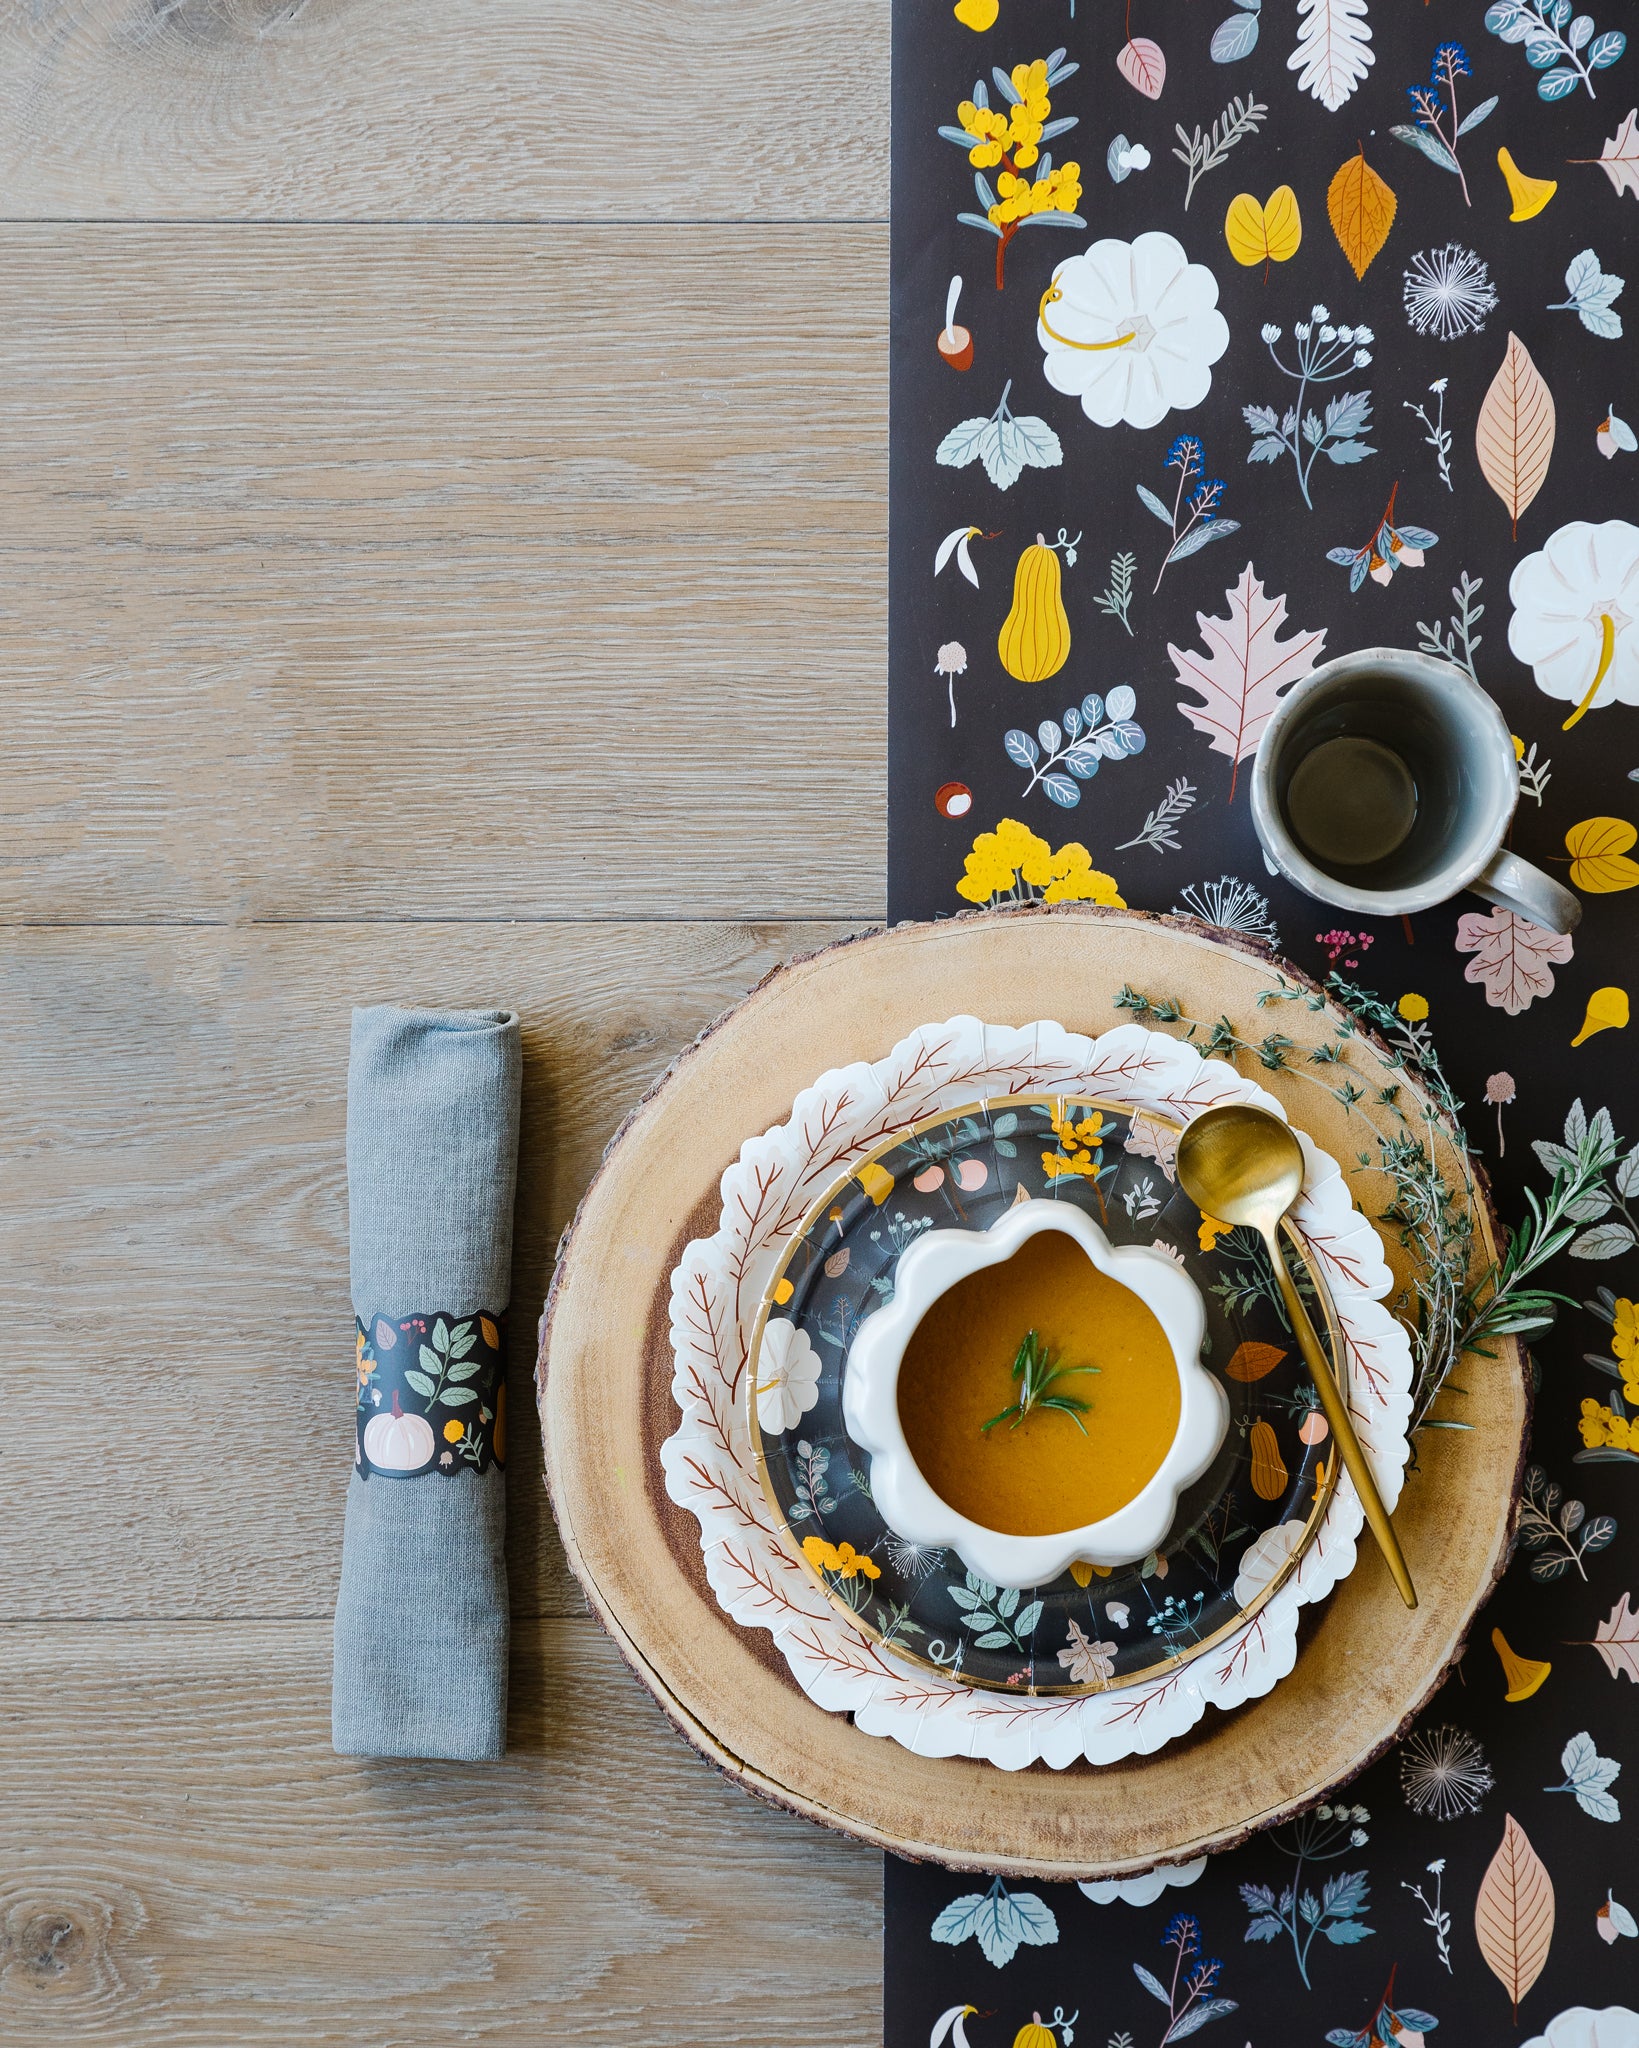 Nature Harvest Paper Table Runner | The Party Darling 